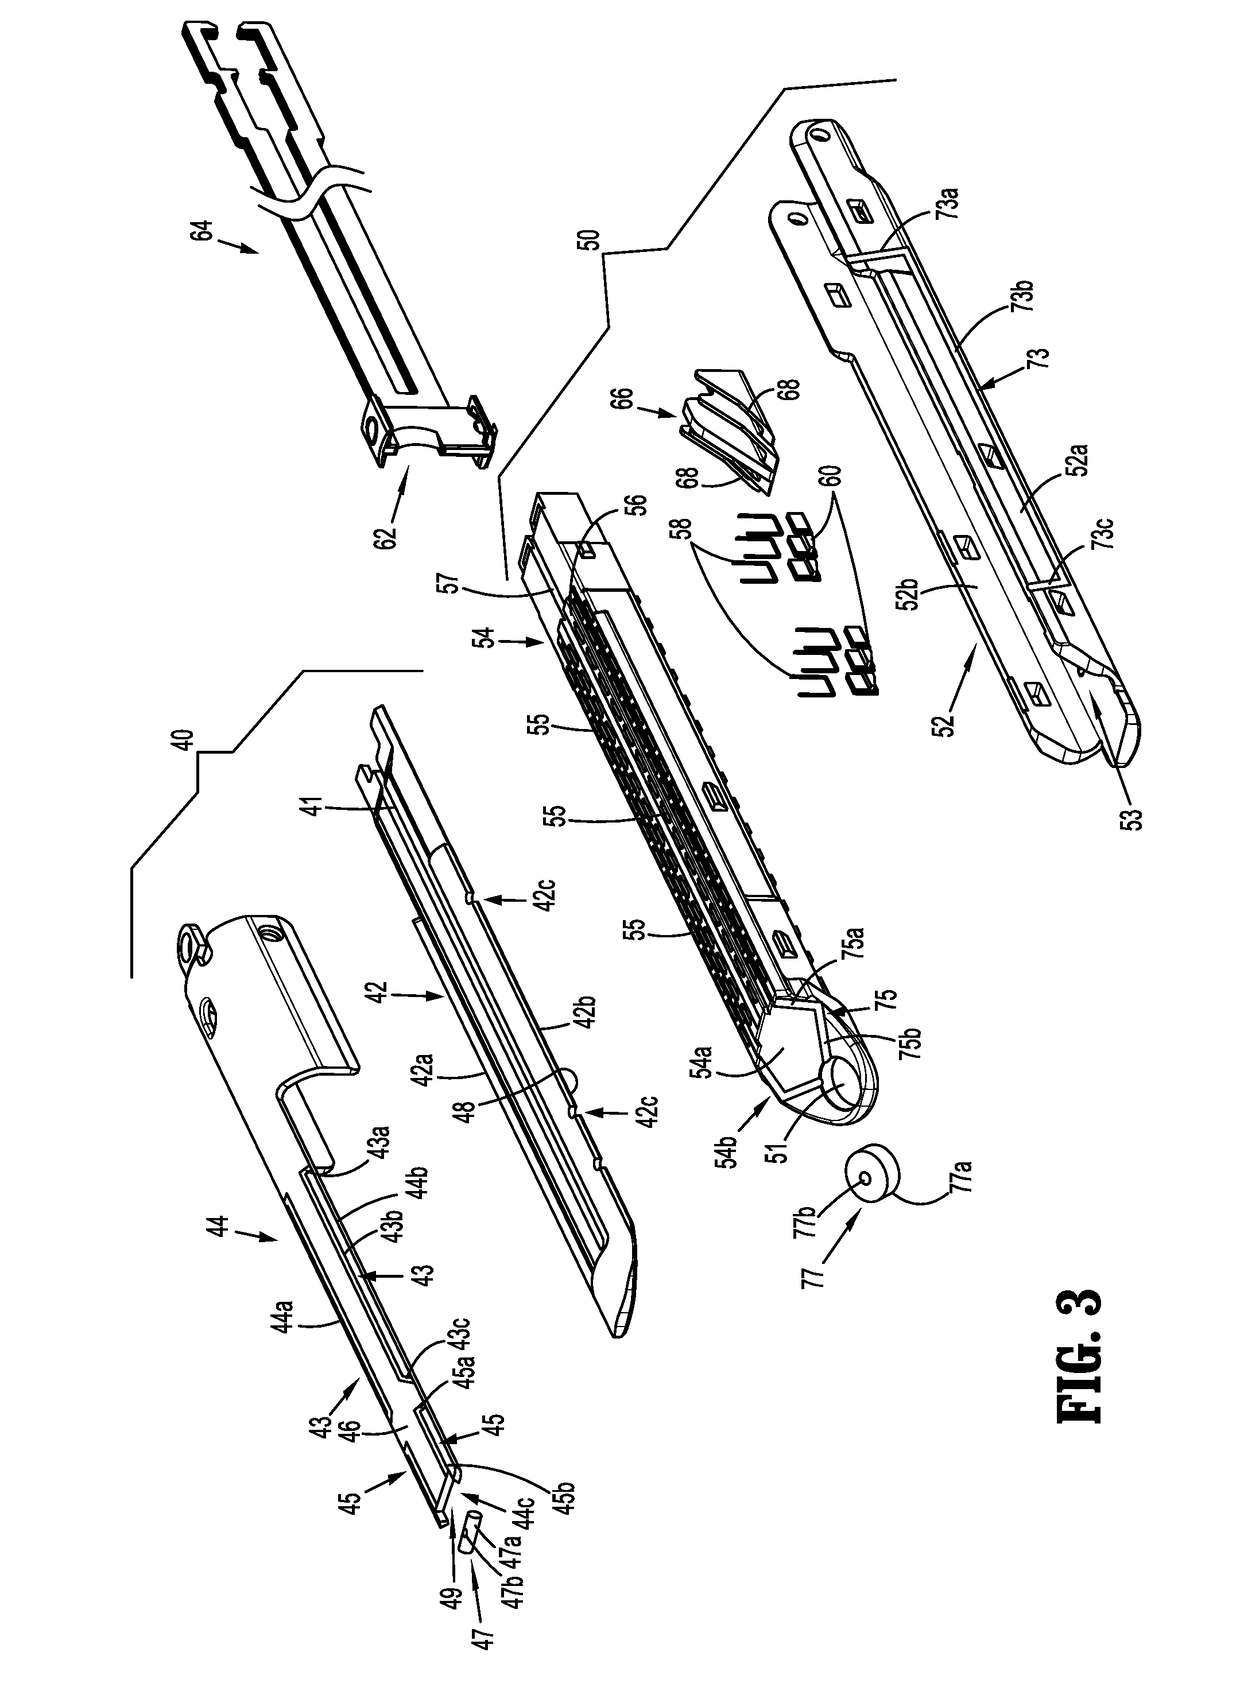 Surgical buttress retention systems for surgical stapling apparatus